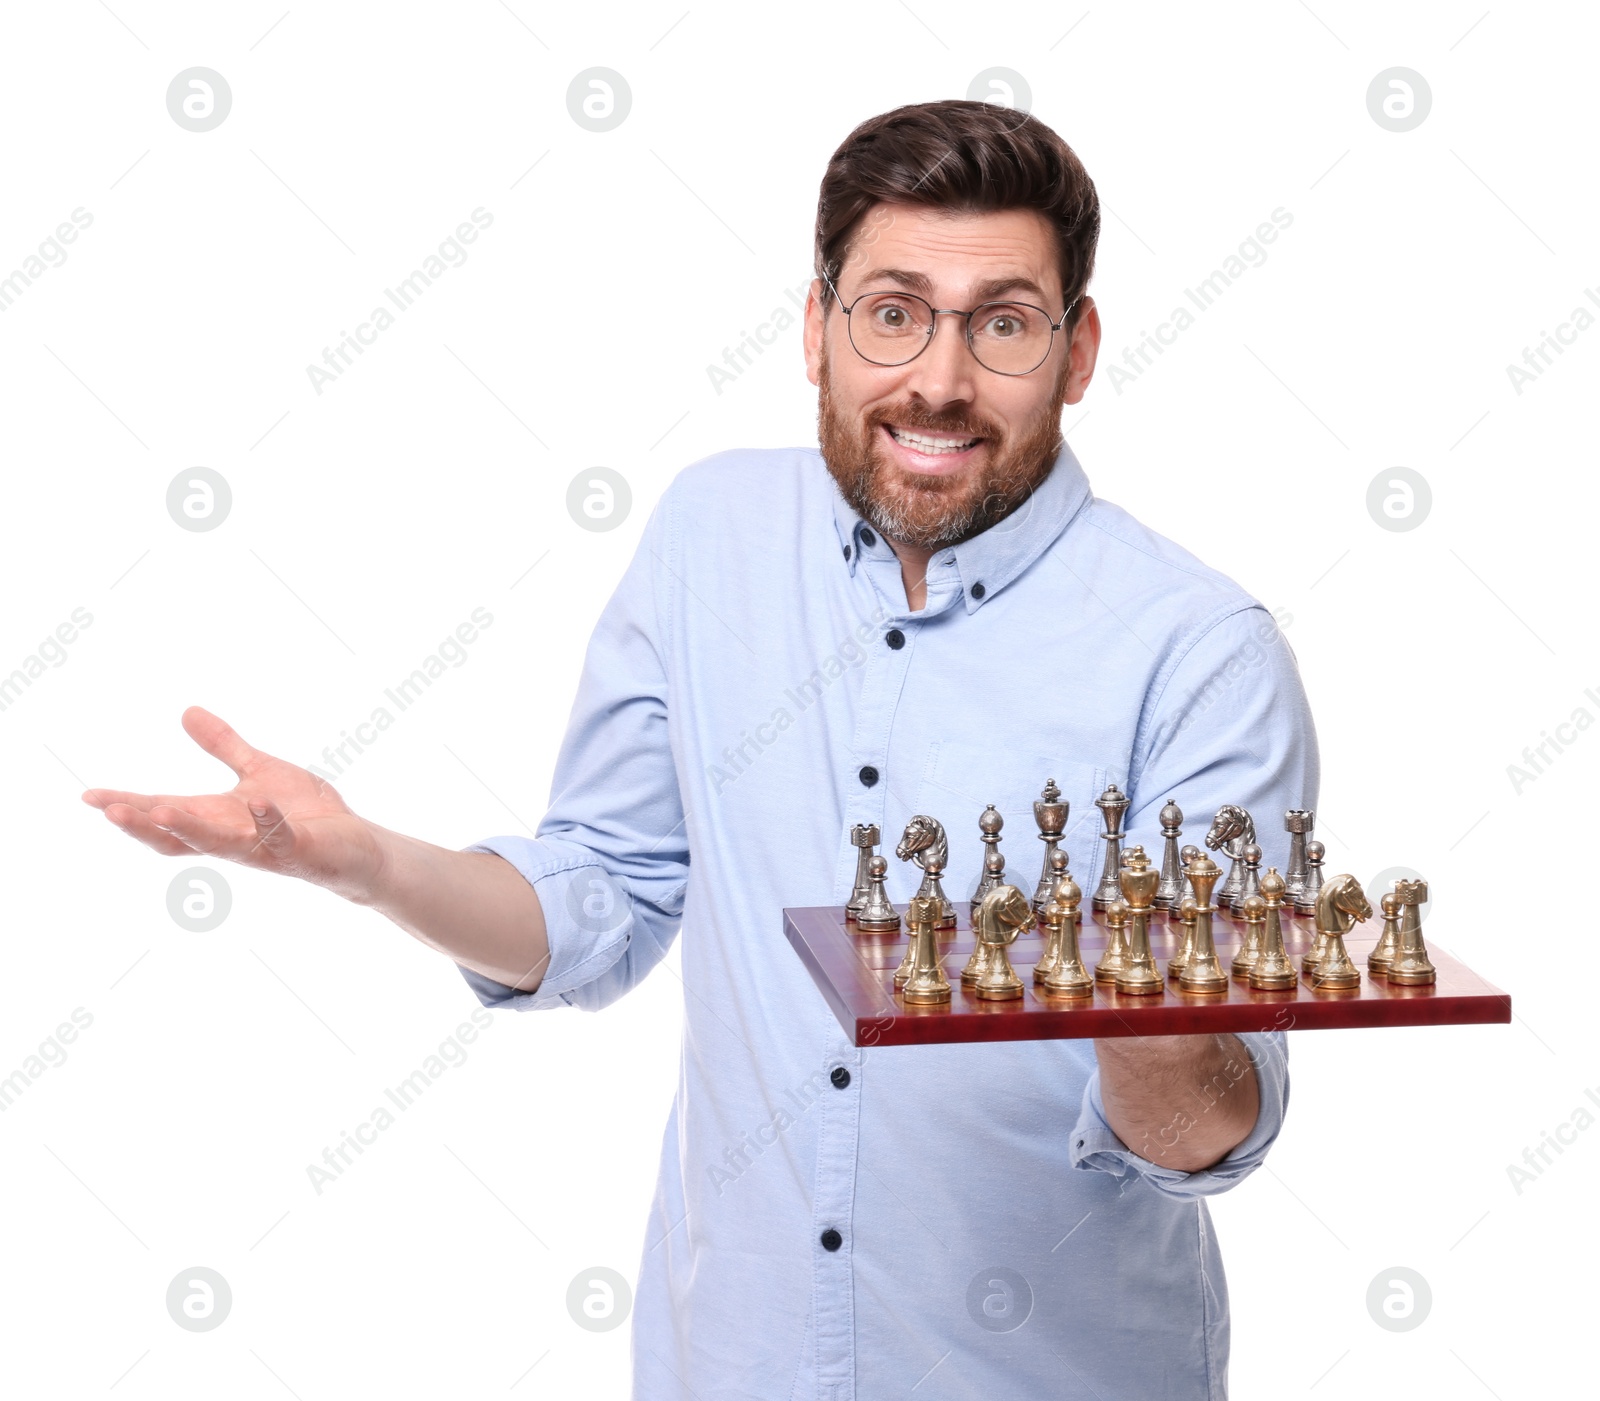 Photo of Confused man holding chessboard with game pieces on white background